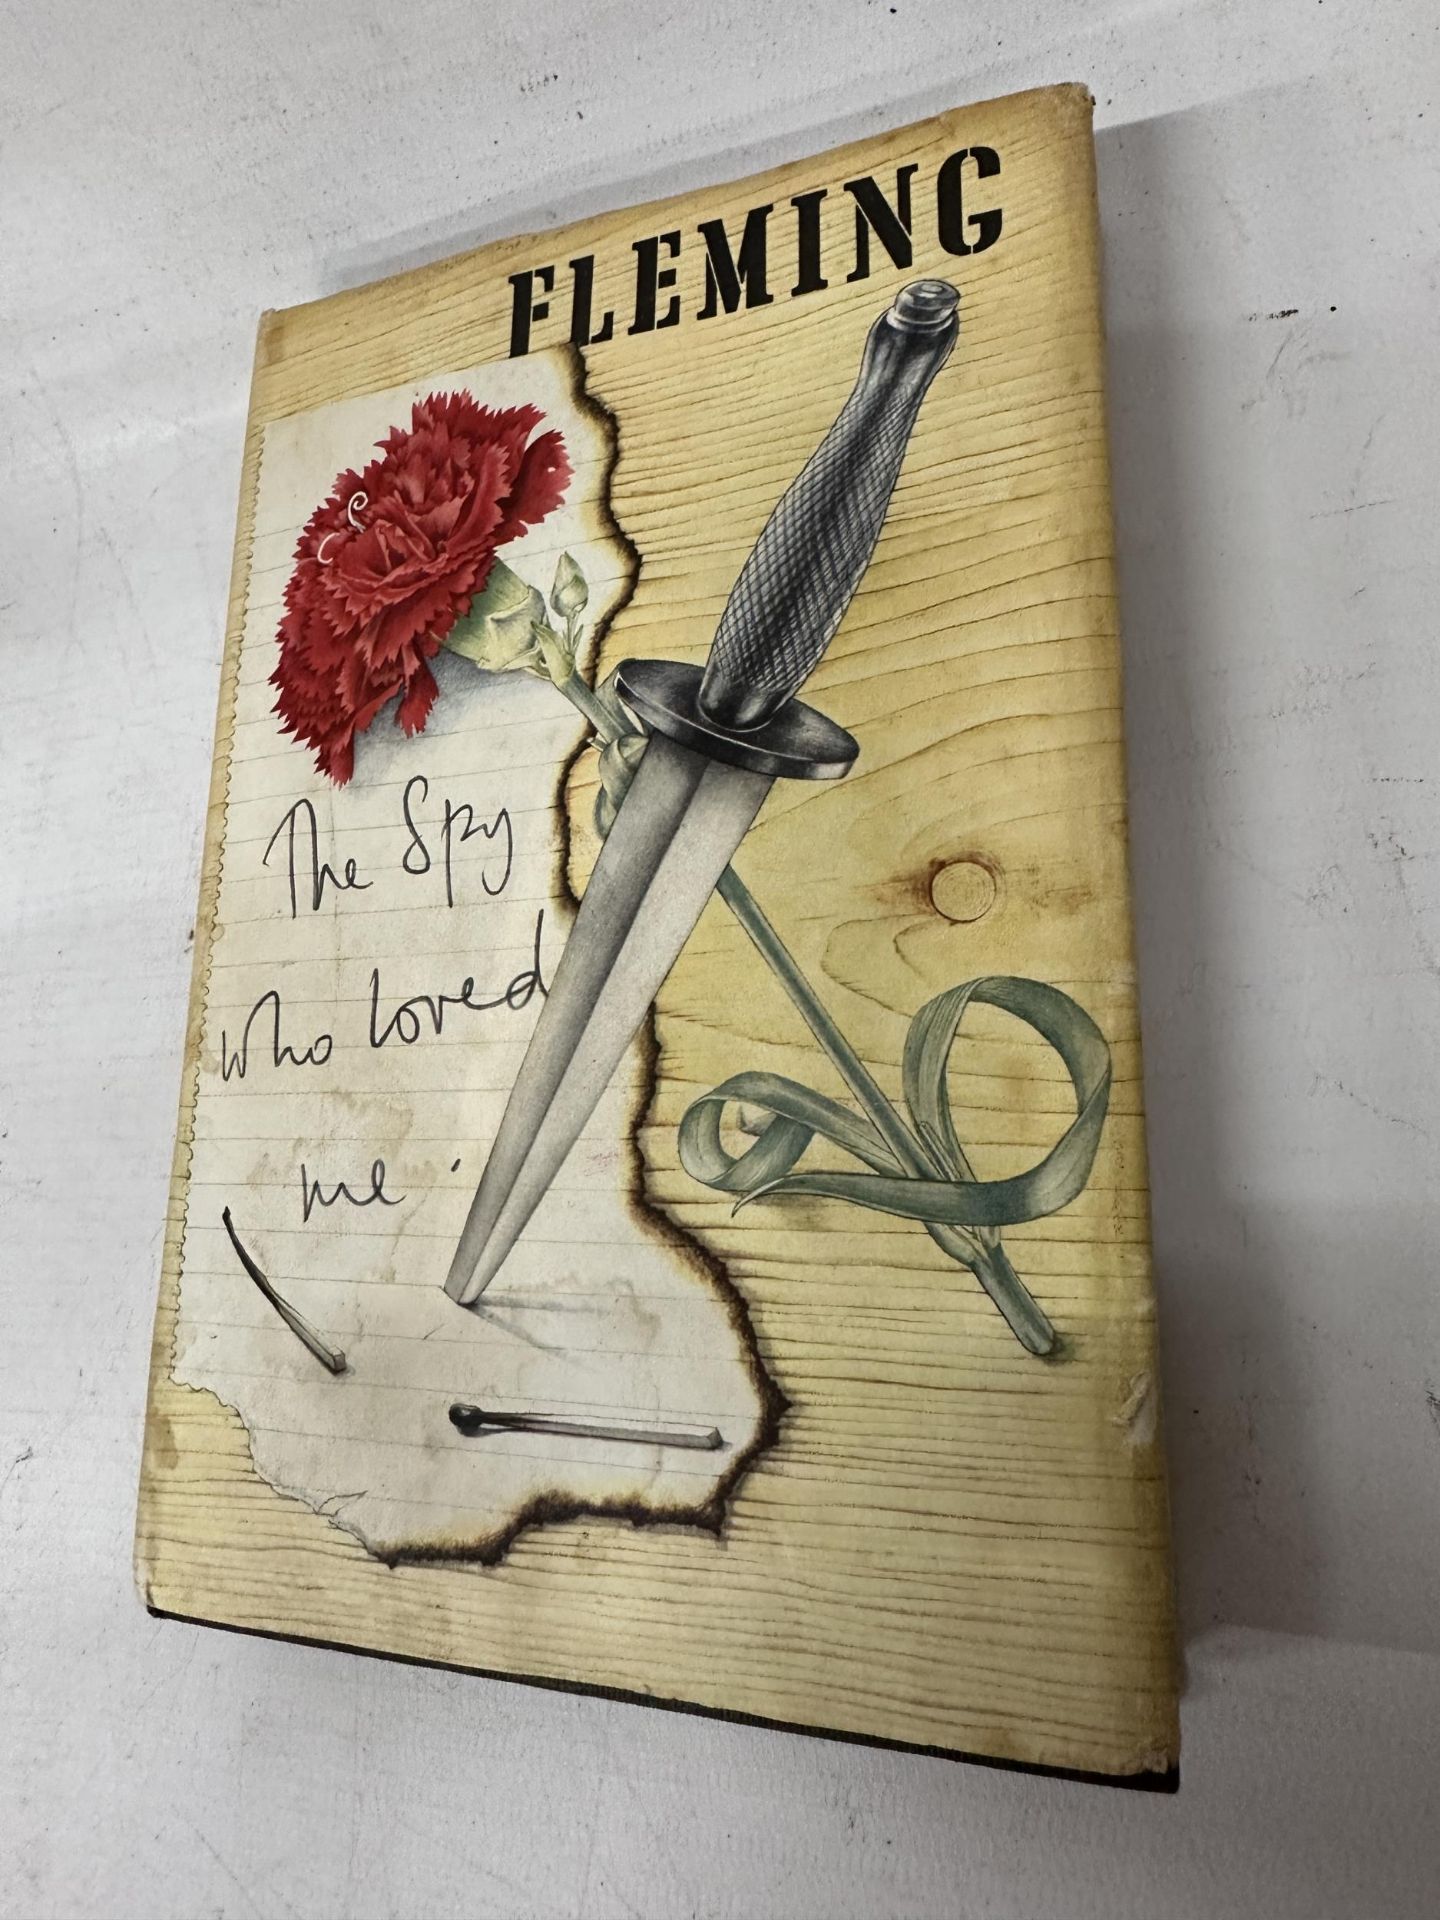 A 1962 IAN FLEMING FIRST EDITION, THE SPY WHO LOVED ME, JAMES BOND HARDBACK BOOK COMPLETE WITH